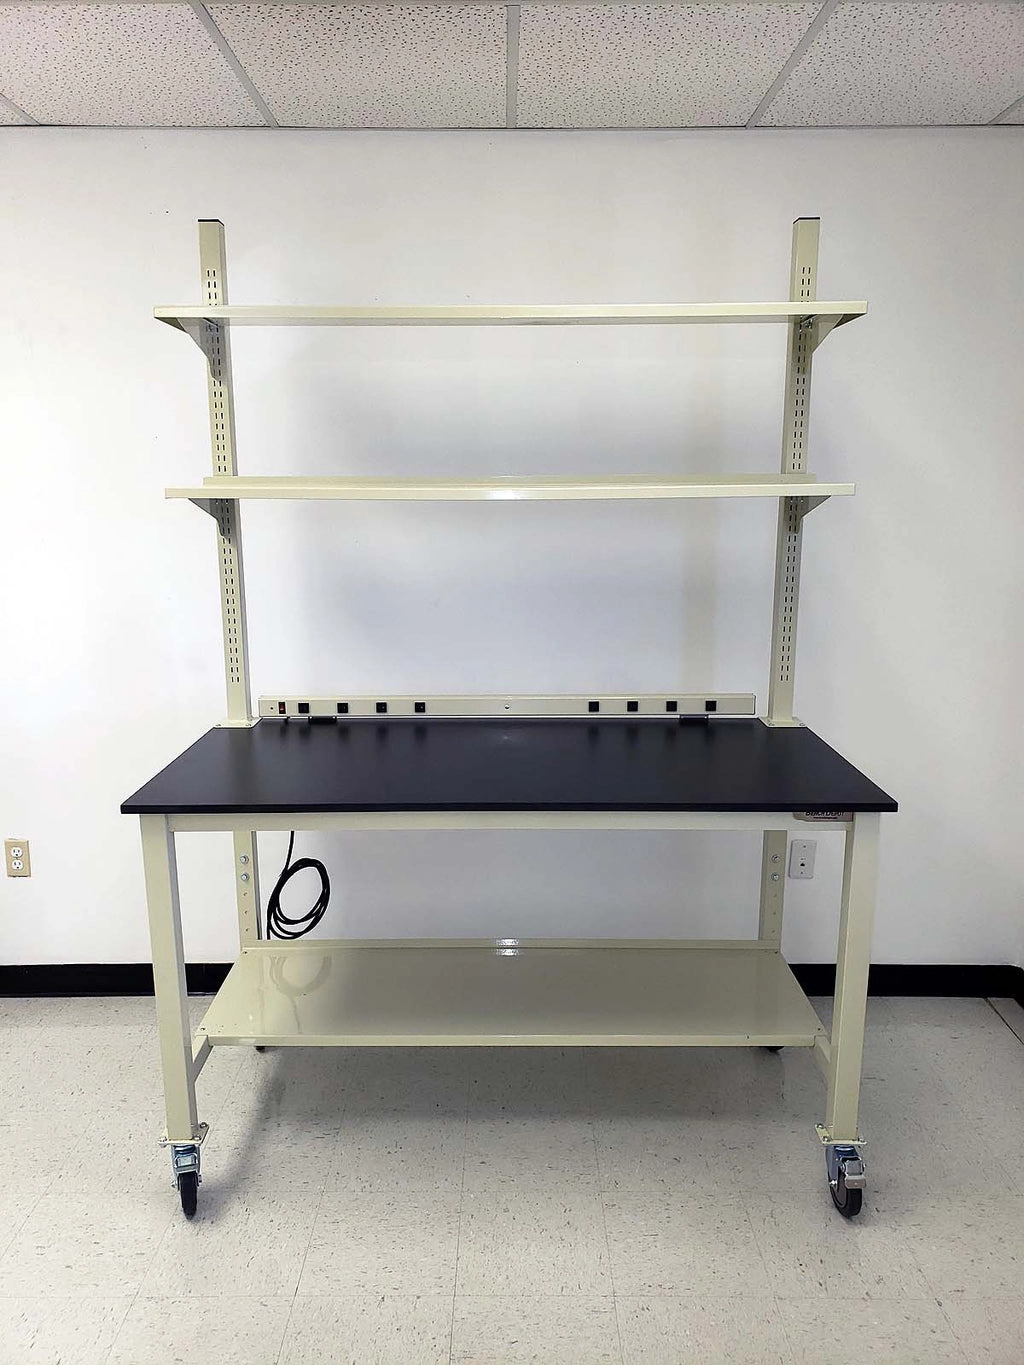 Quick Labs 4 foot heavy duty mobile lab bench with plastic laminate countertop, (2) upper shelves, undercounter shelf, power strip, and casters-adjustable height | QMBH3048-PL